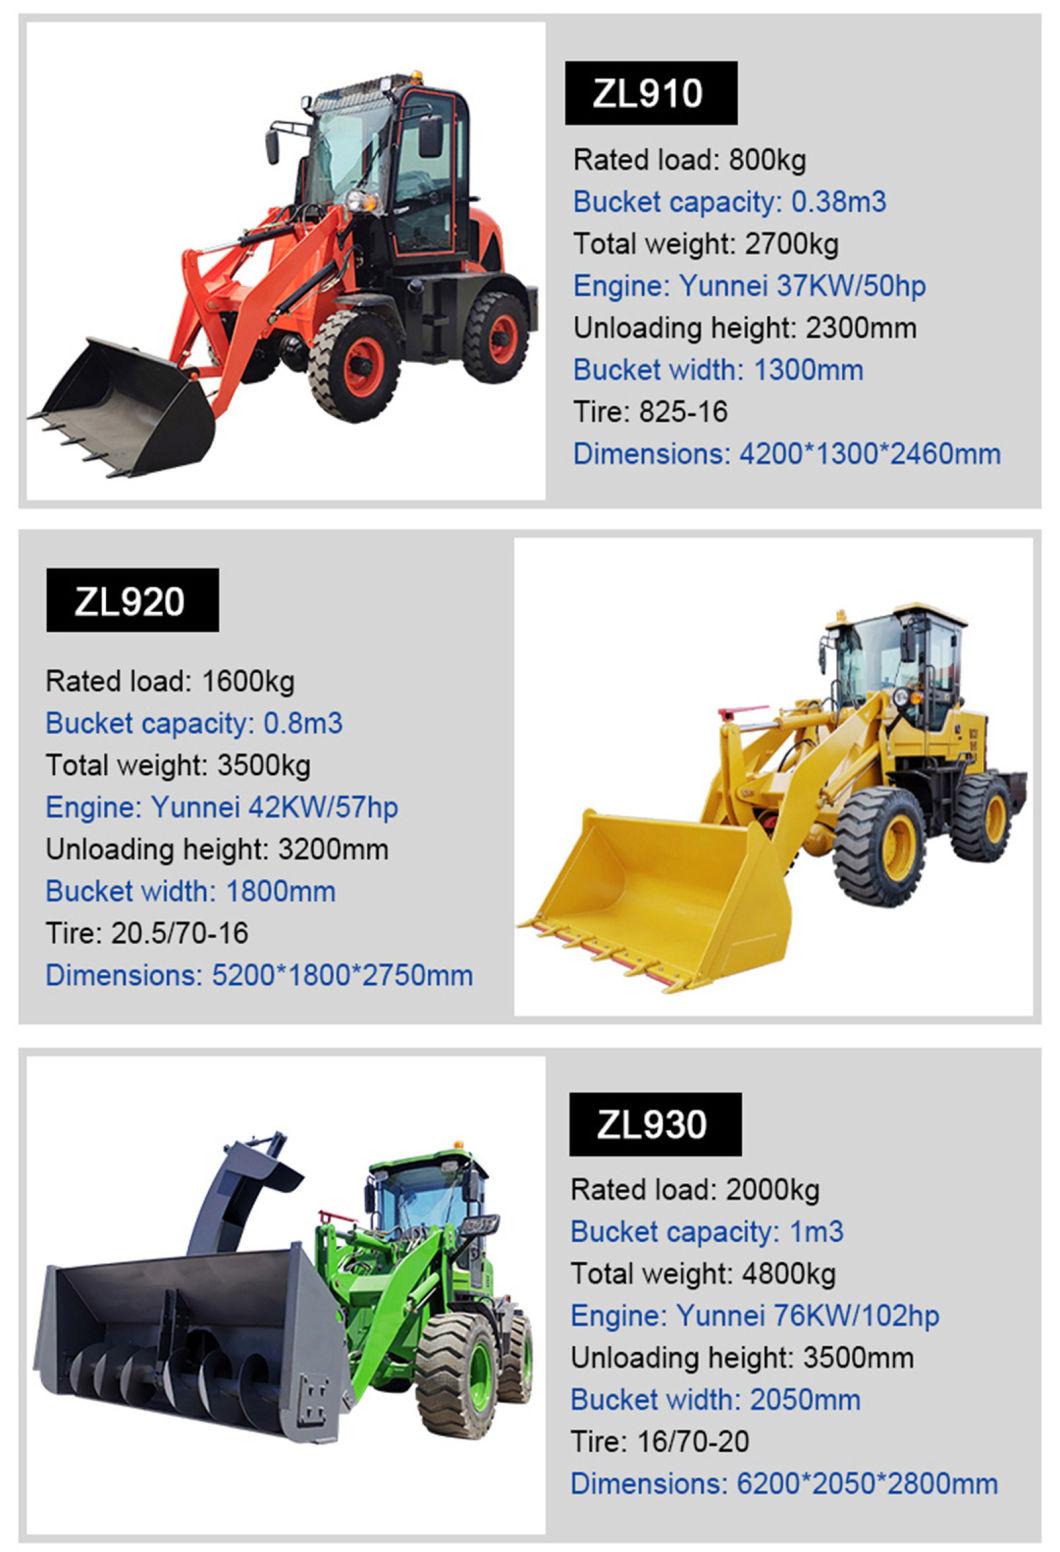 Advanced Technology Hydraulic Articulated Small Wheel Mini Loader From Japan